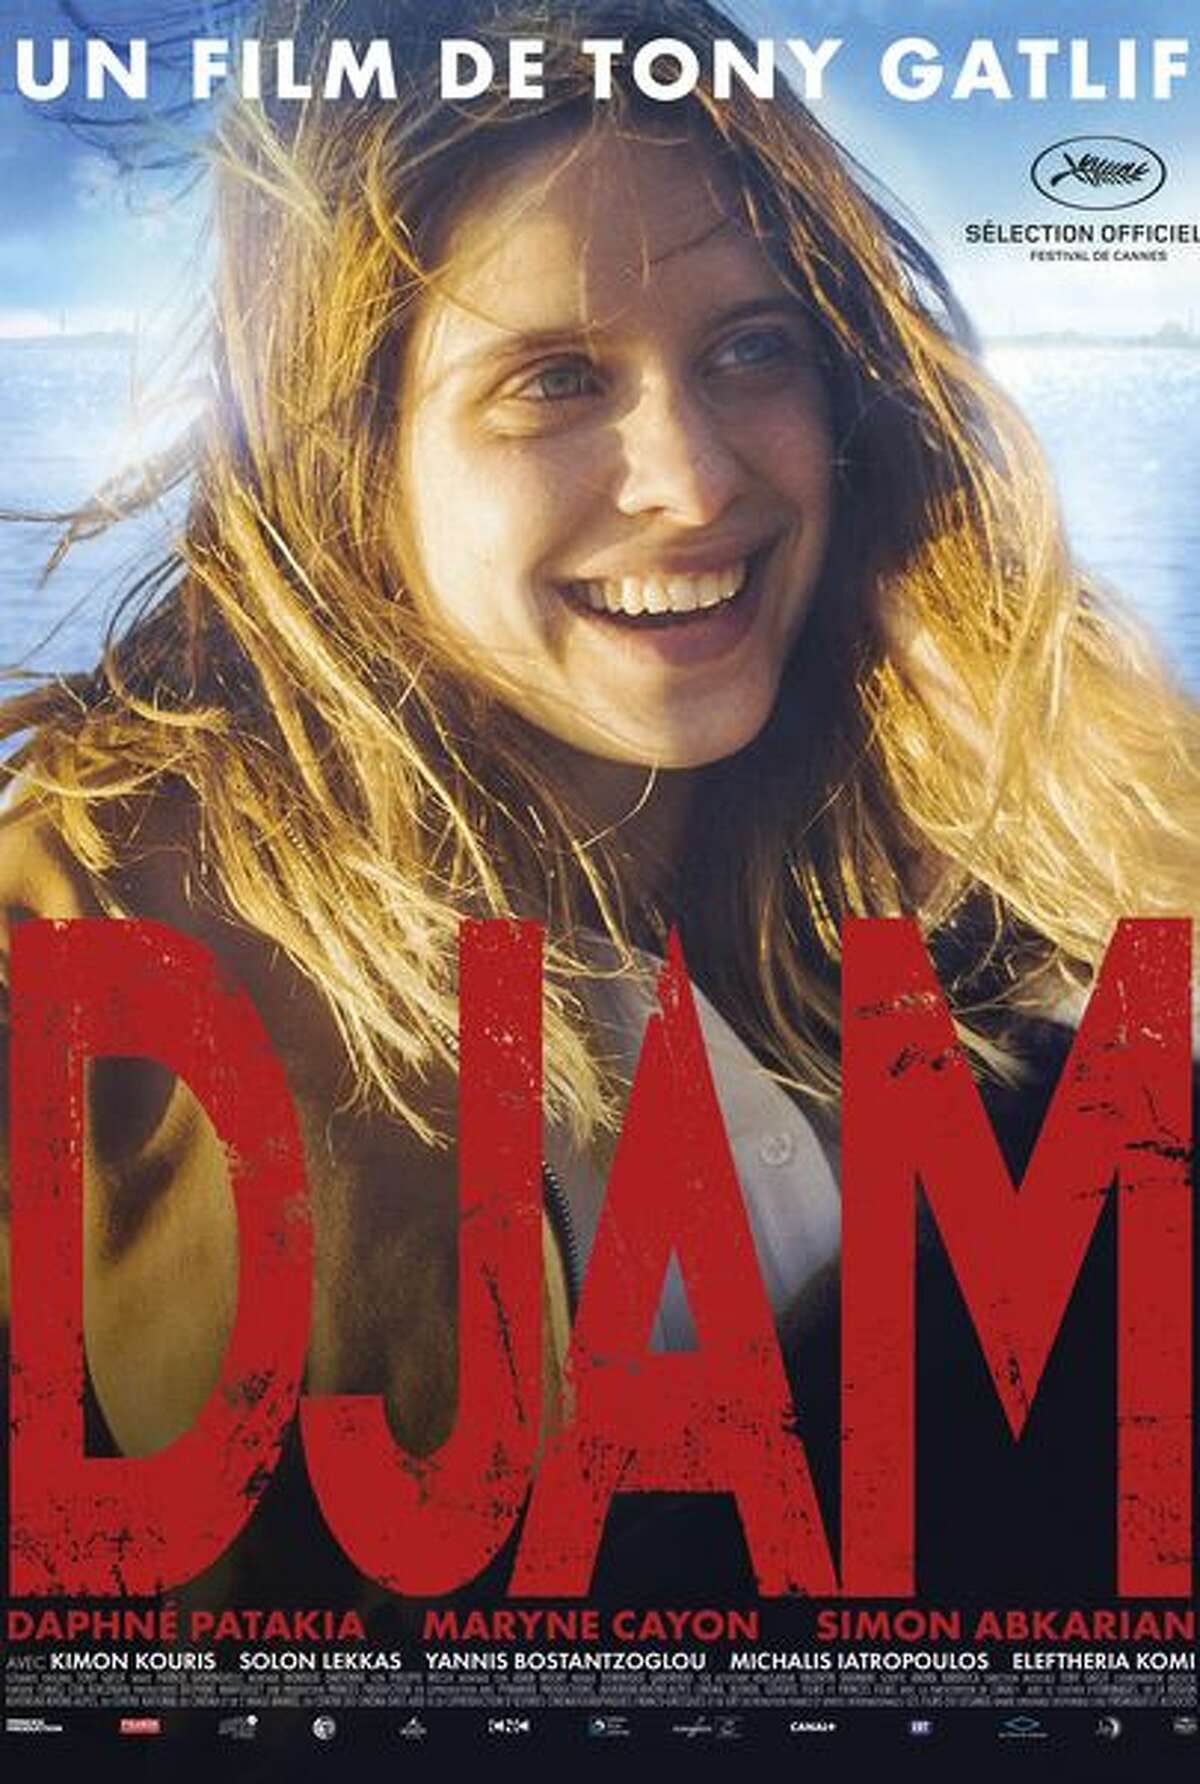 Djam is a film by a Romany director who uses the gypsy experience to reflect on the refugee experience. It is one of five films Laurence Kardish chose for this weekend's mini-film festival.